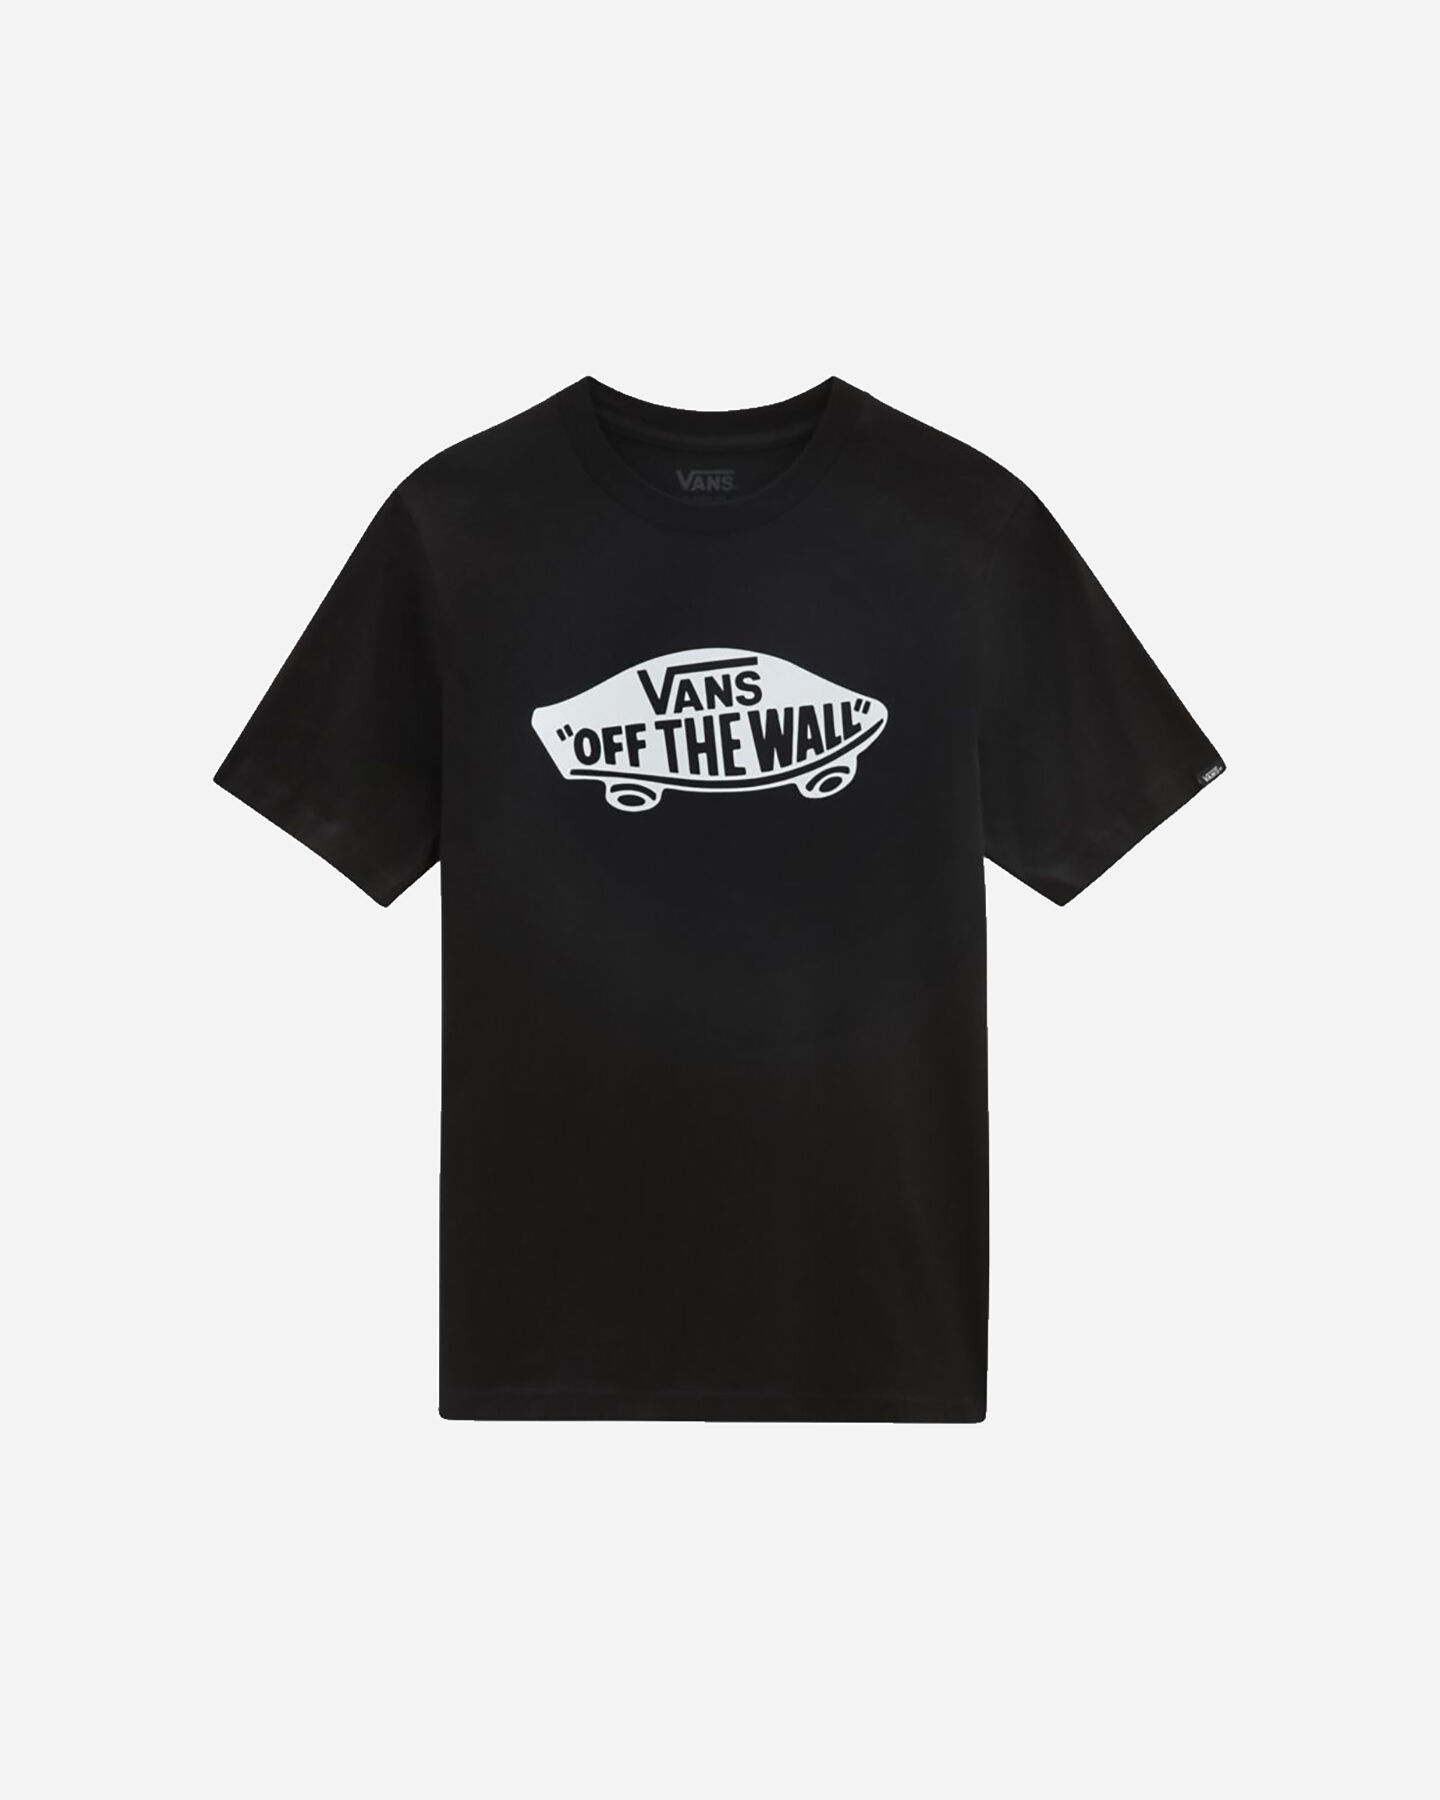  T-Shirt VANS OFF THE WALL JR S4048052 scatto 3